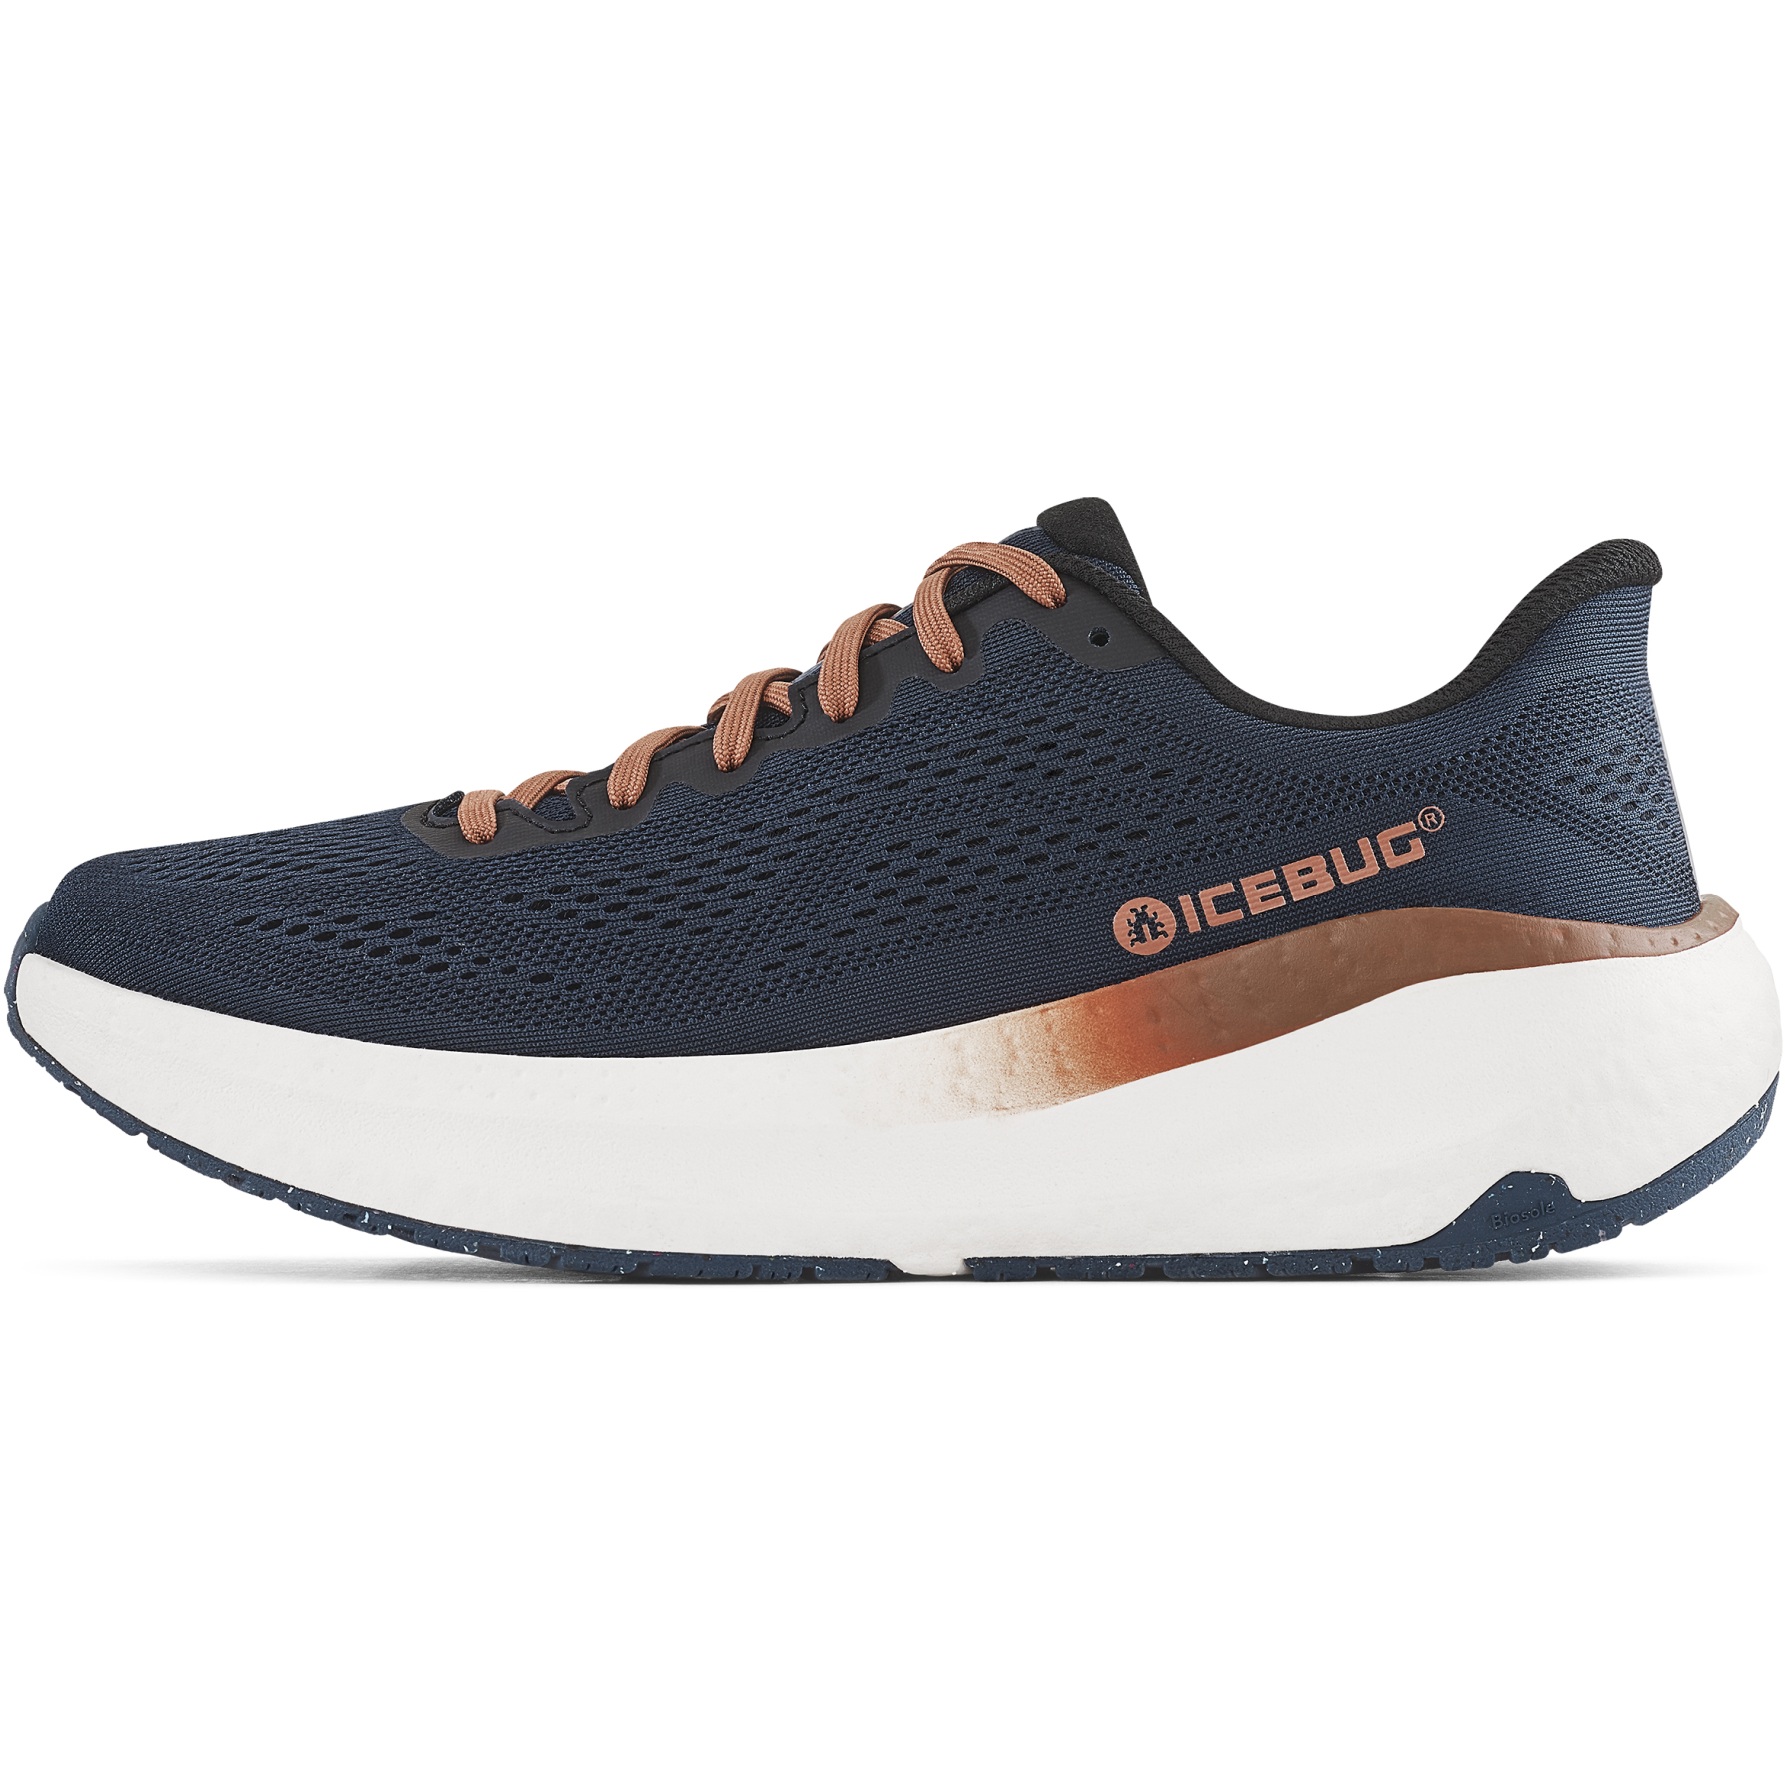 Picture of Icebug Aura M RB9X Shoes - deepblue/copper